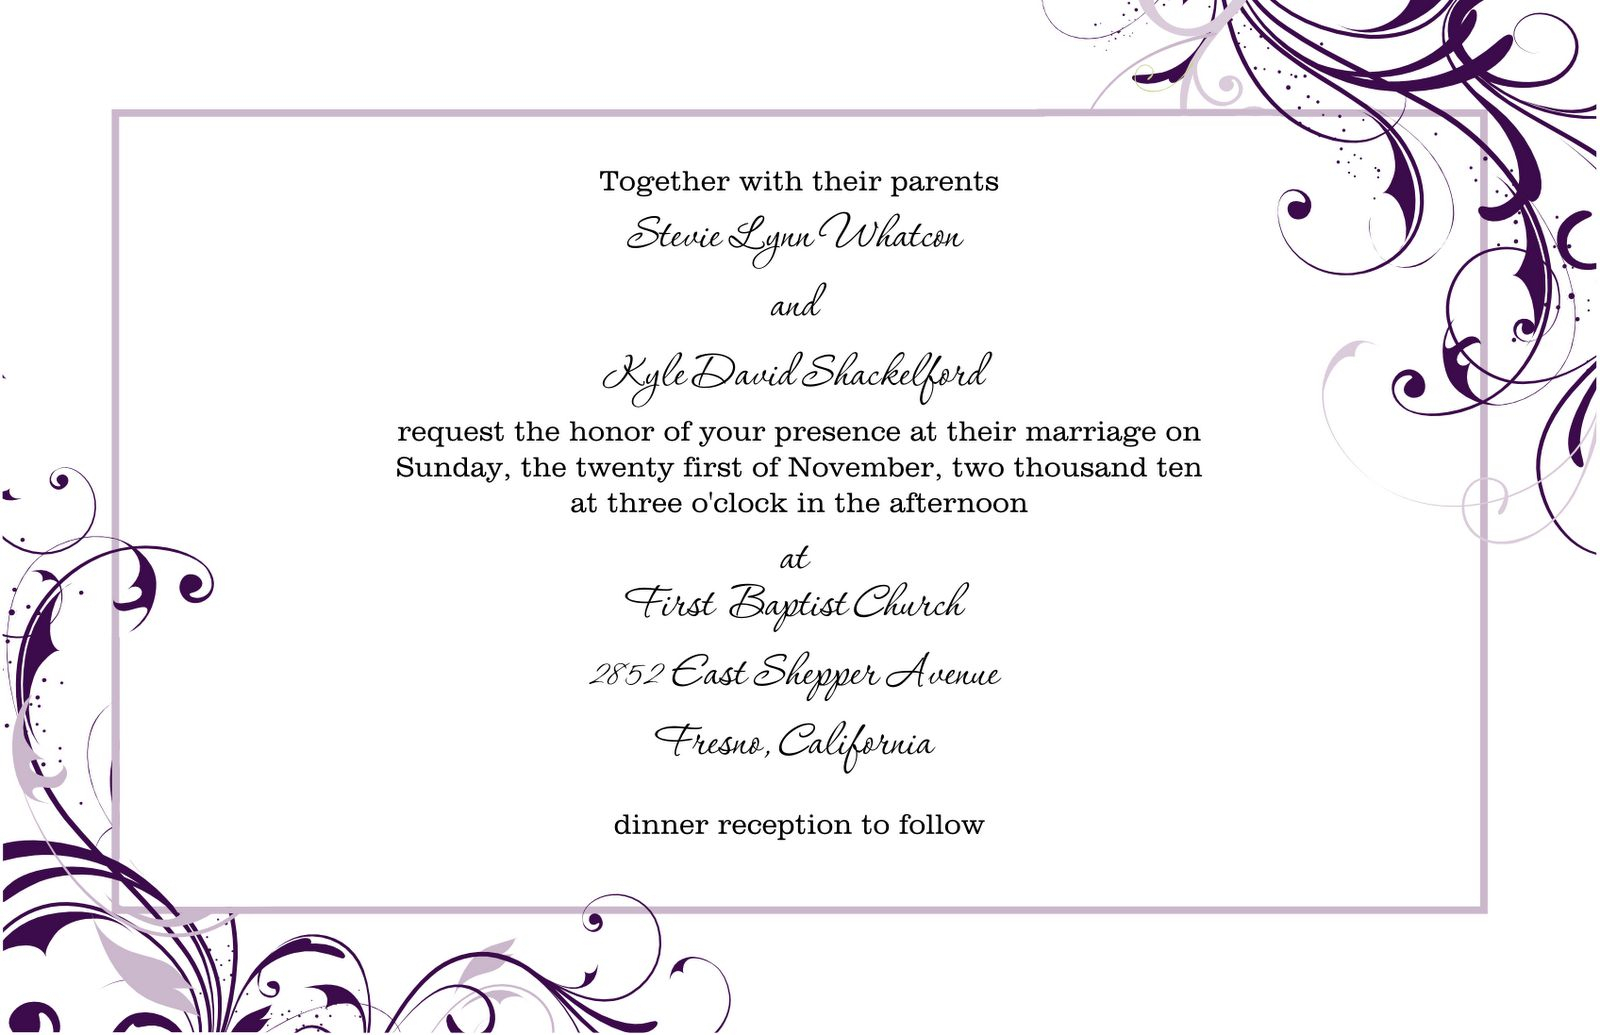 Free Wedding Invitation Templates For Word | Marina Gallery Inside Free Dinner Invitation Templates For Word